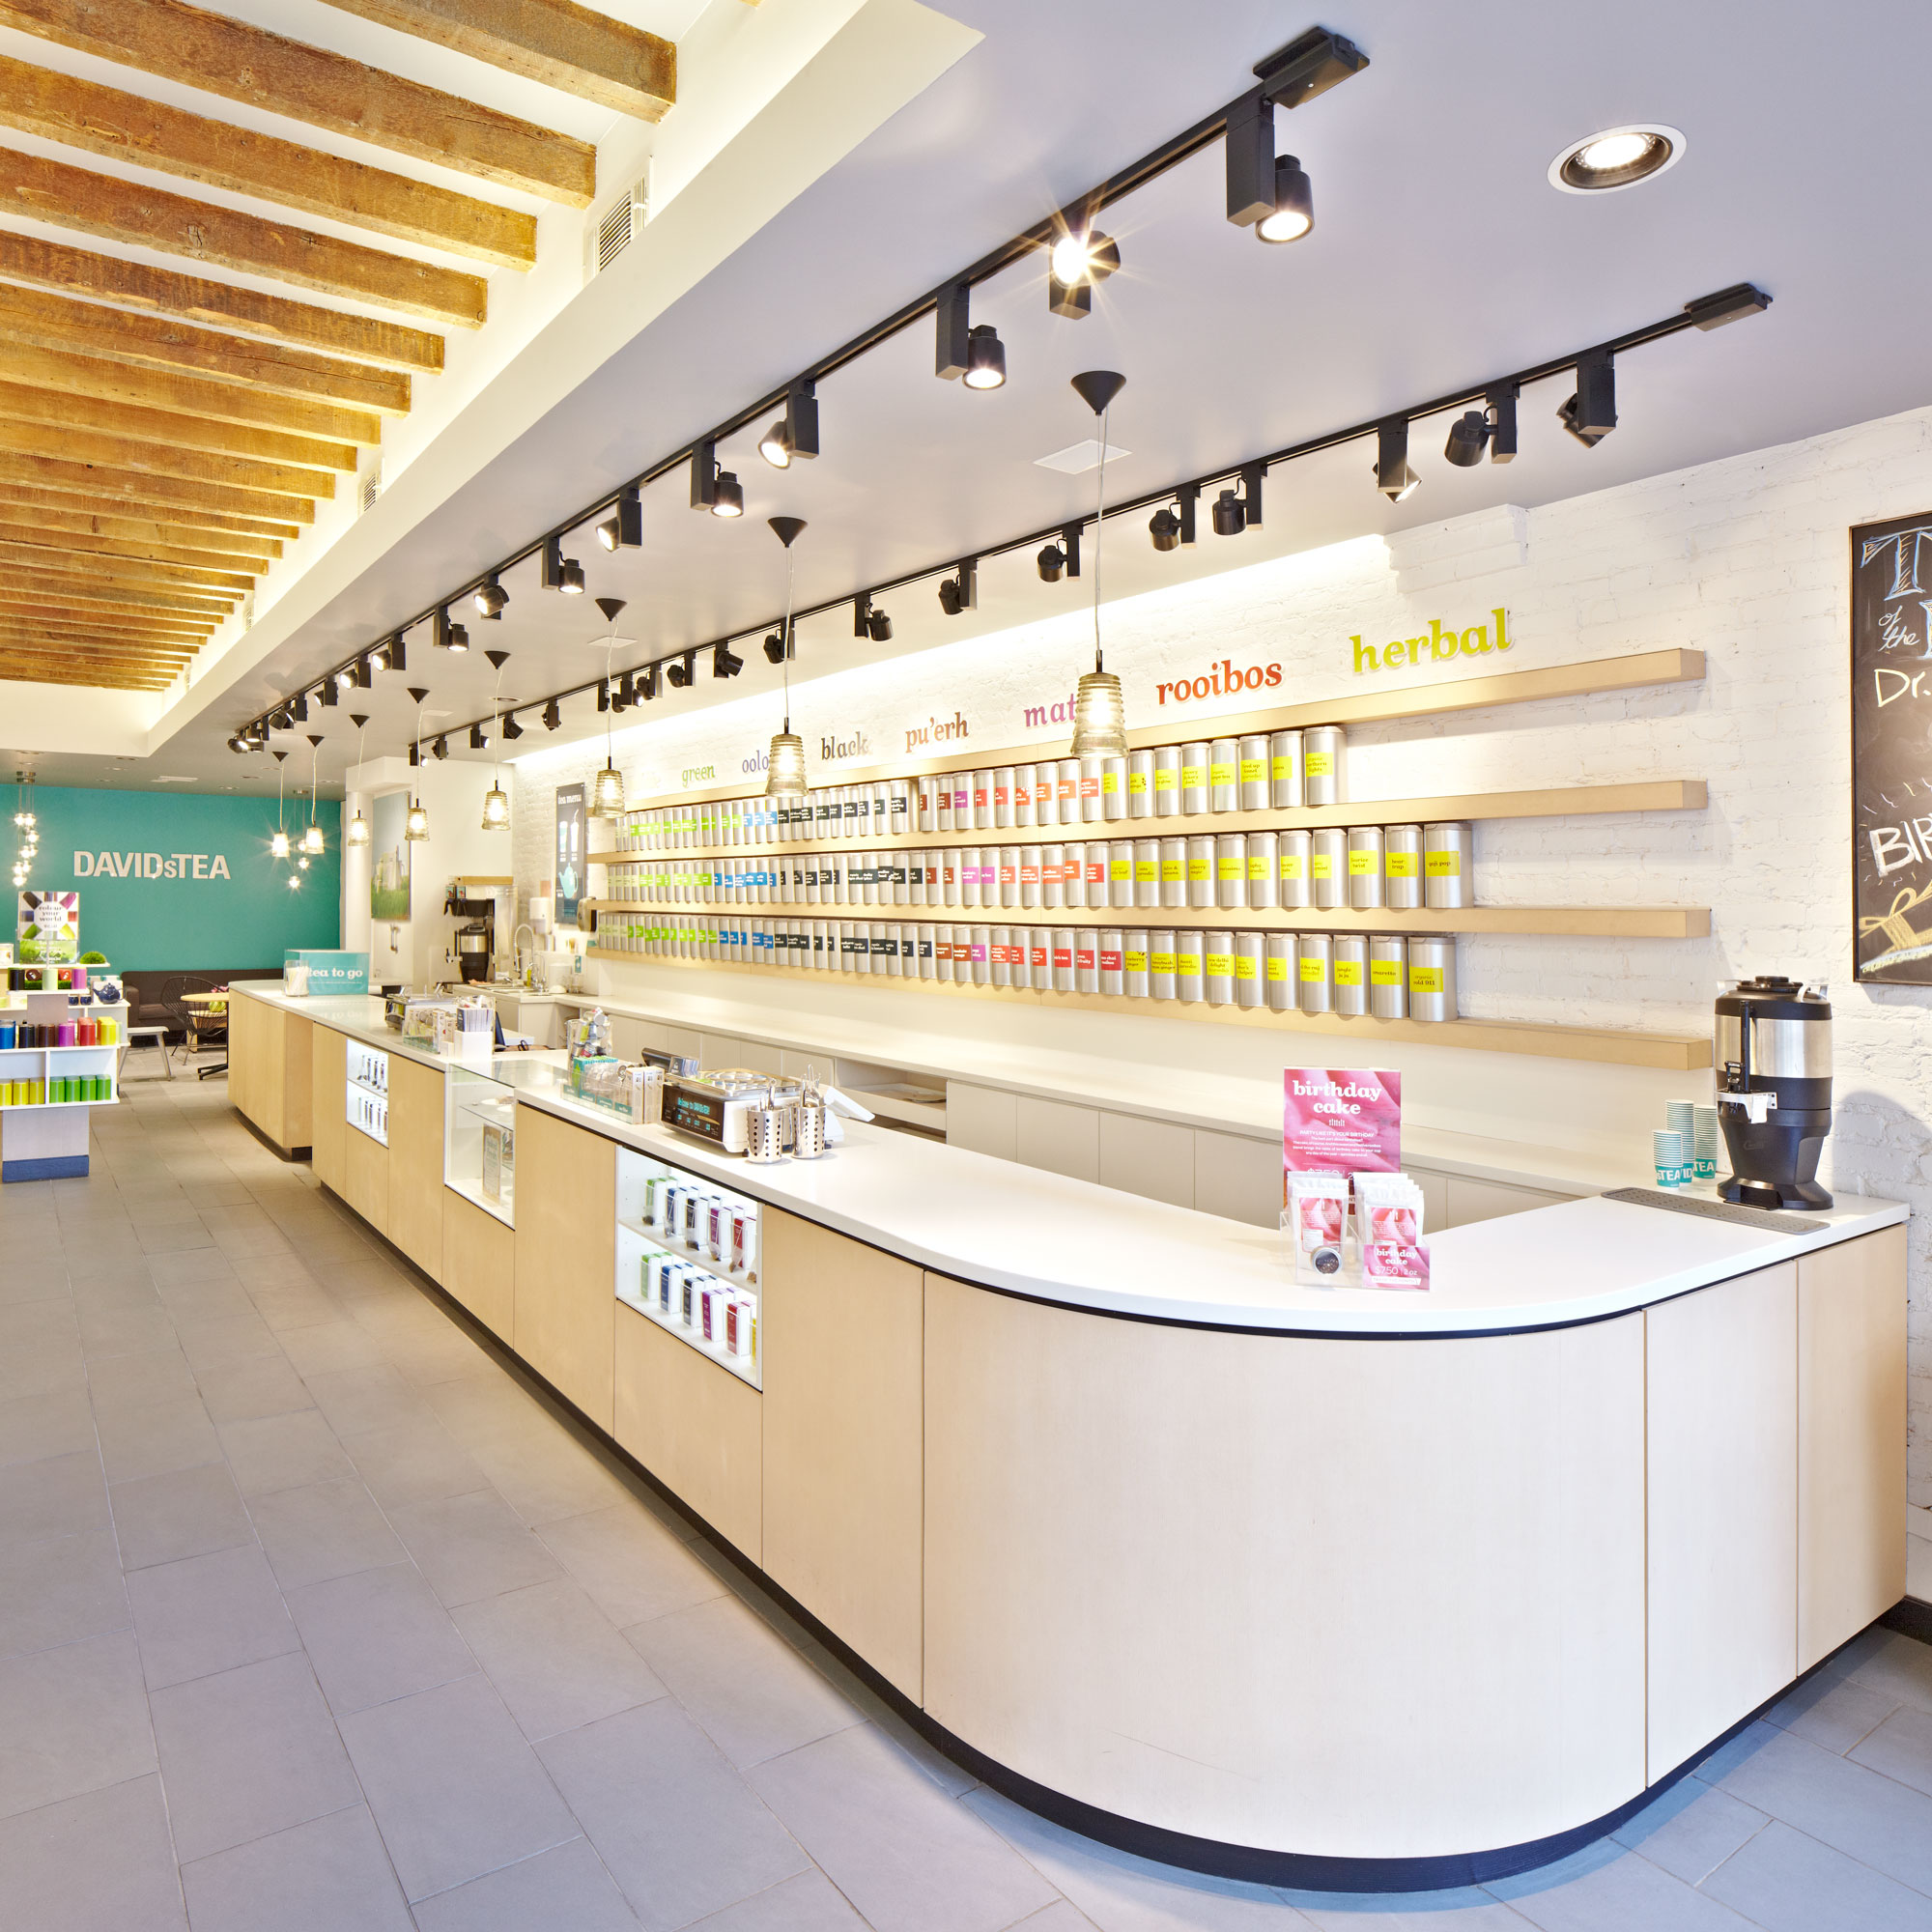  The Tea Wall behind the counter holds up to 120 varieties of straight teas and 